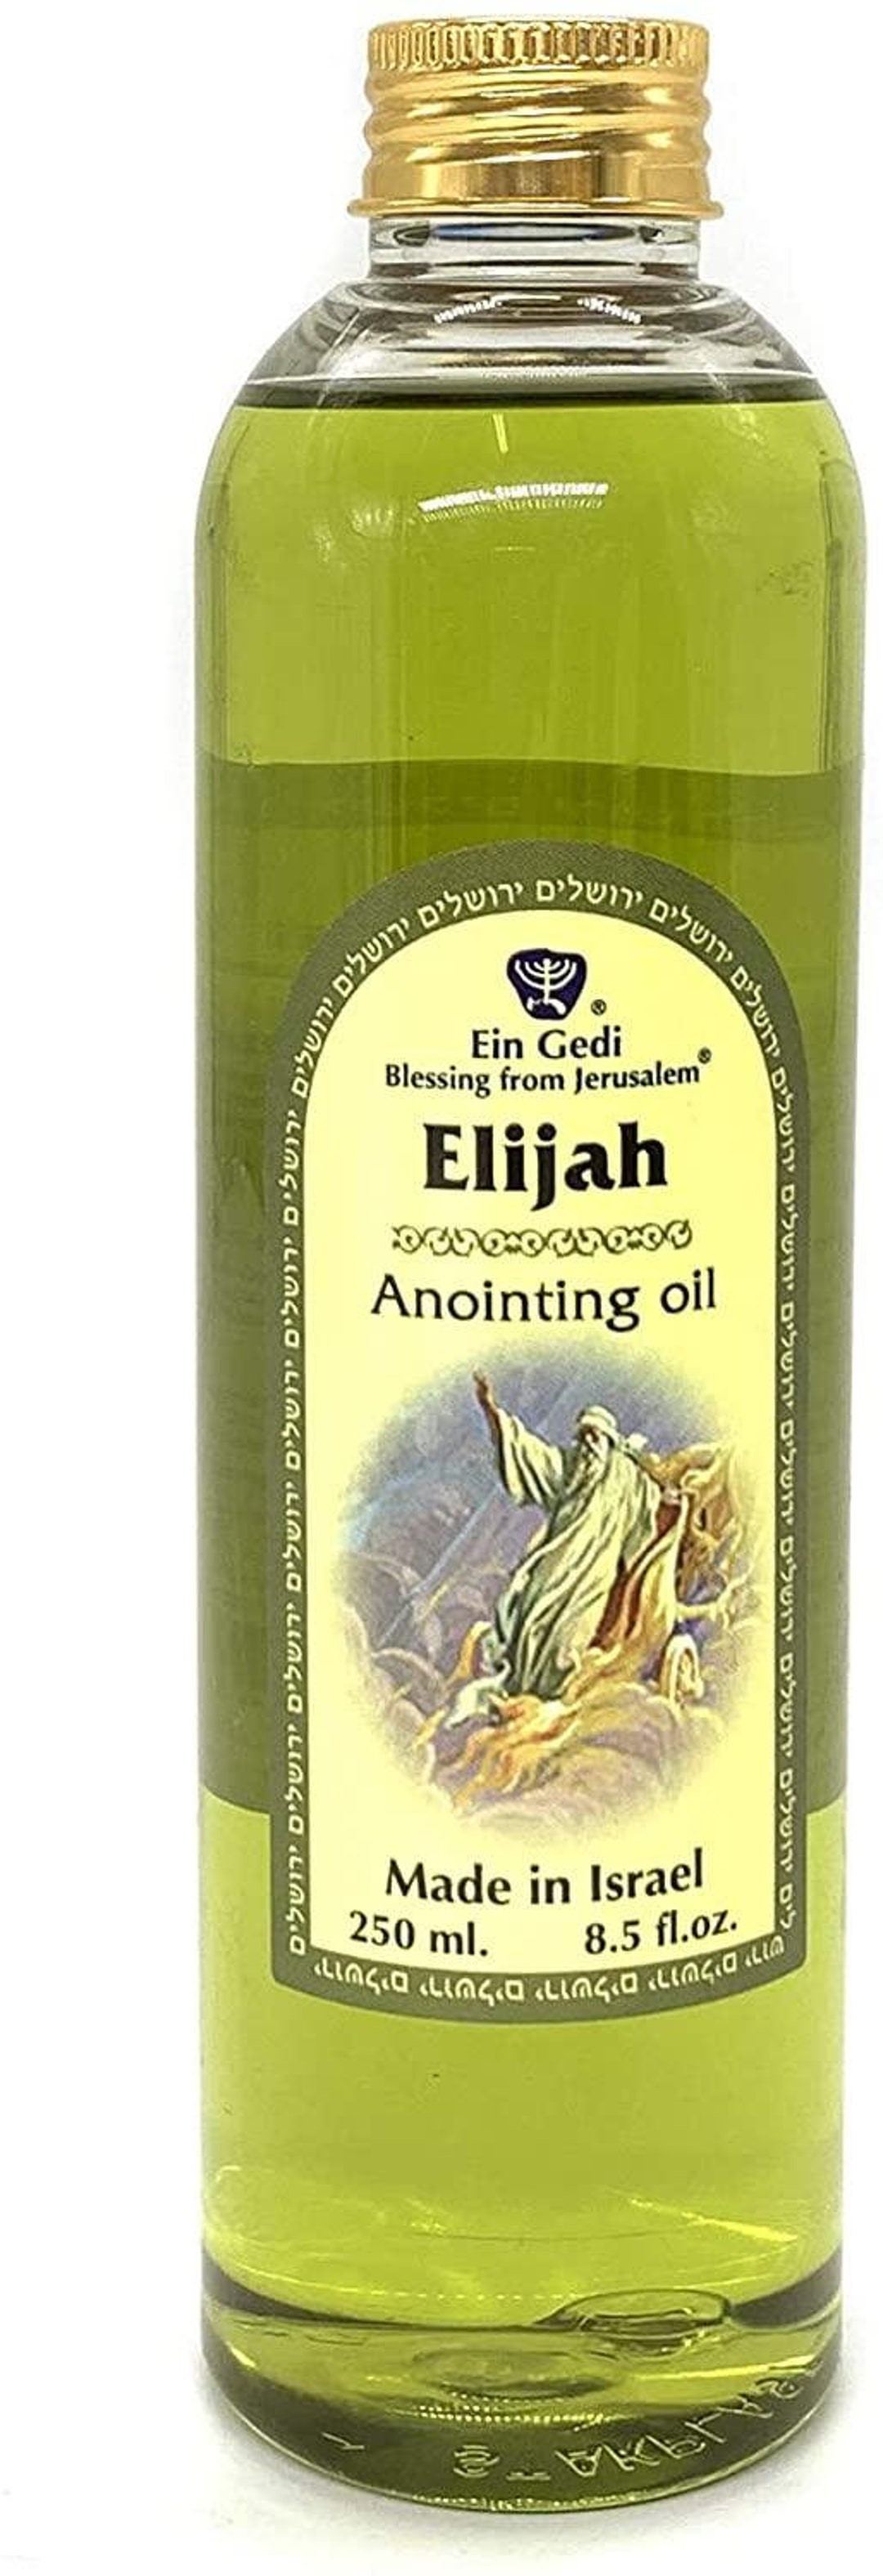 Elijah' Powerful Anointing Oil from the City of God - Prayer Oil